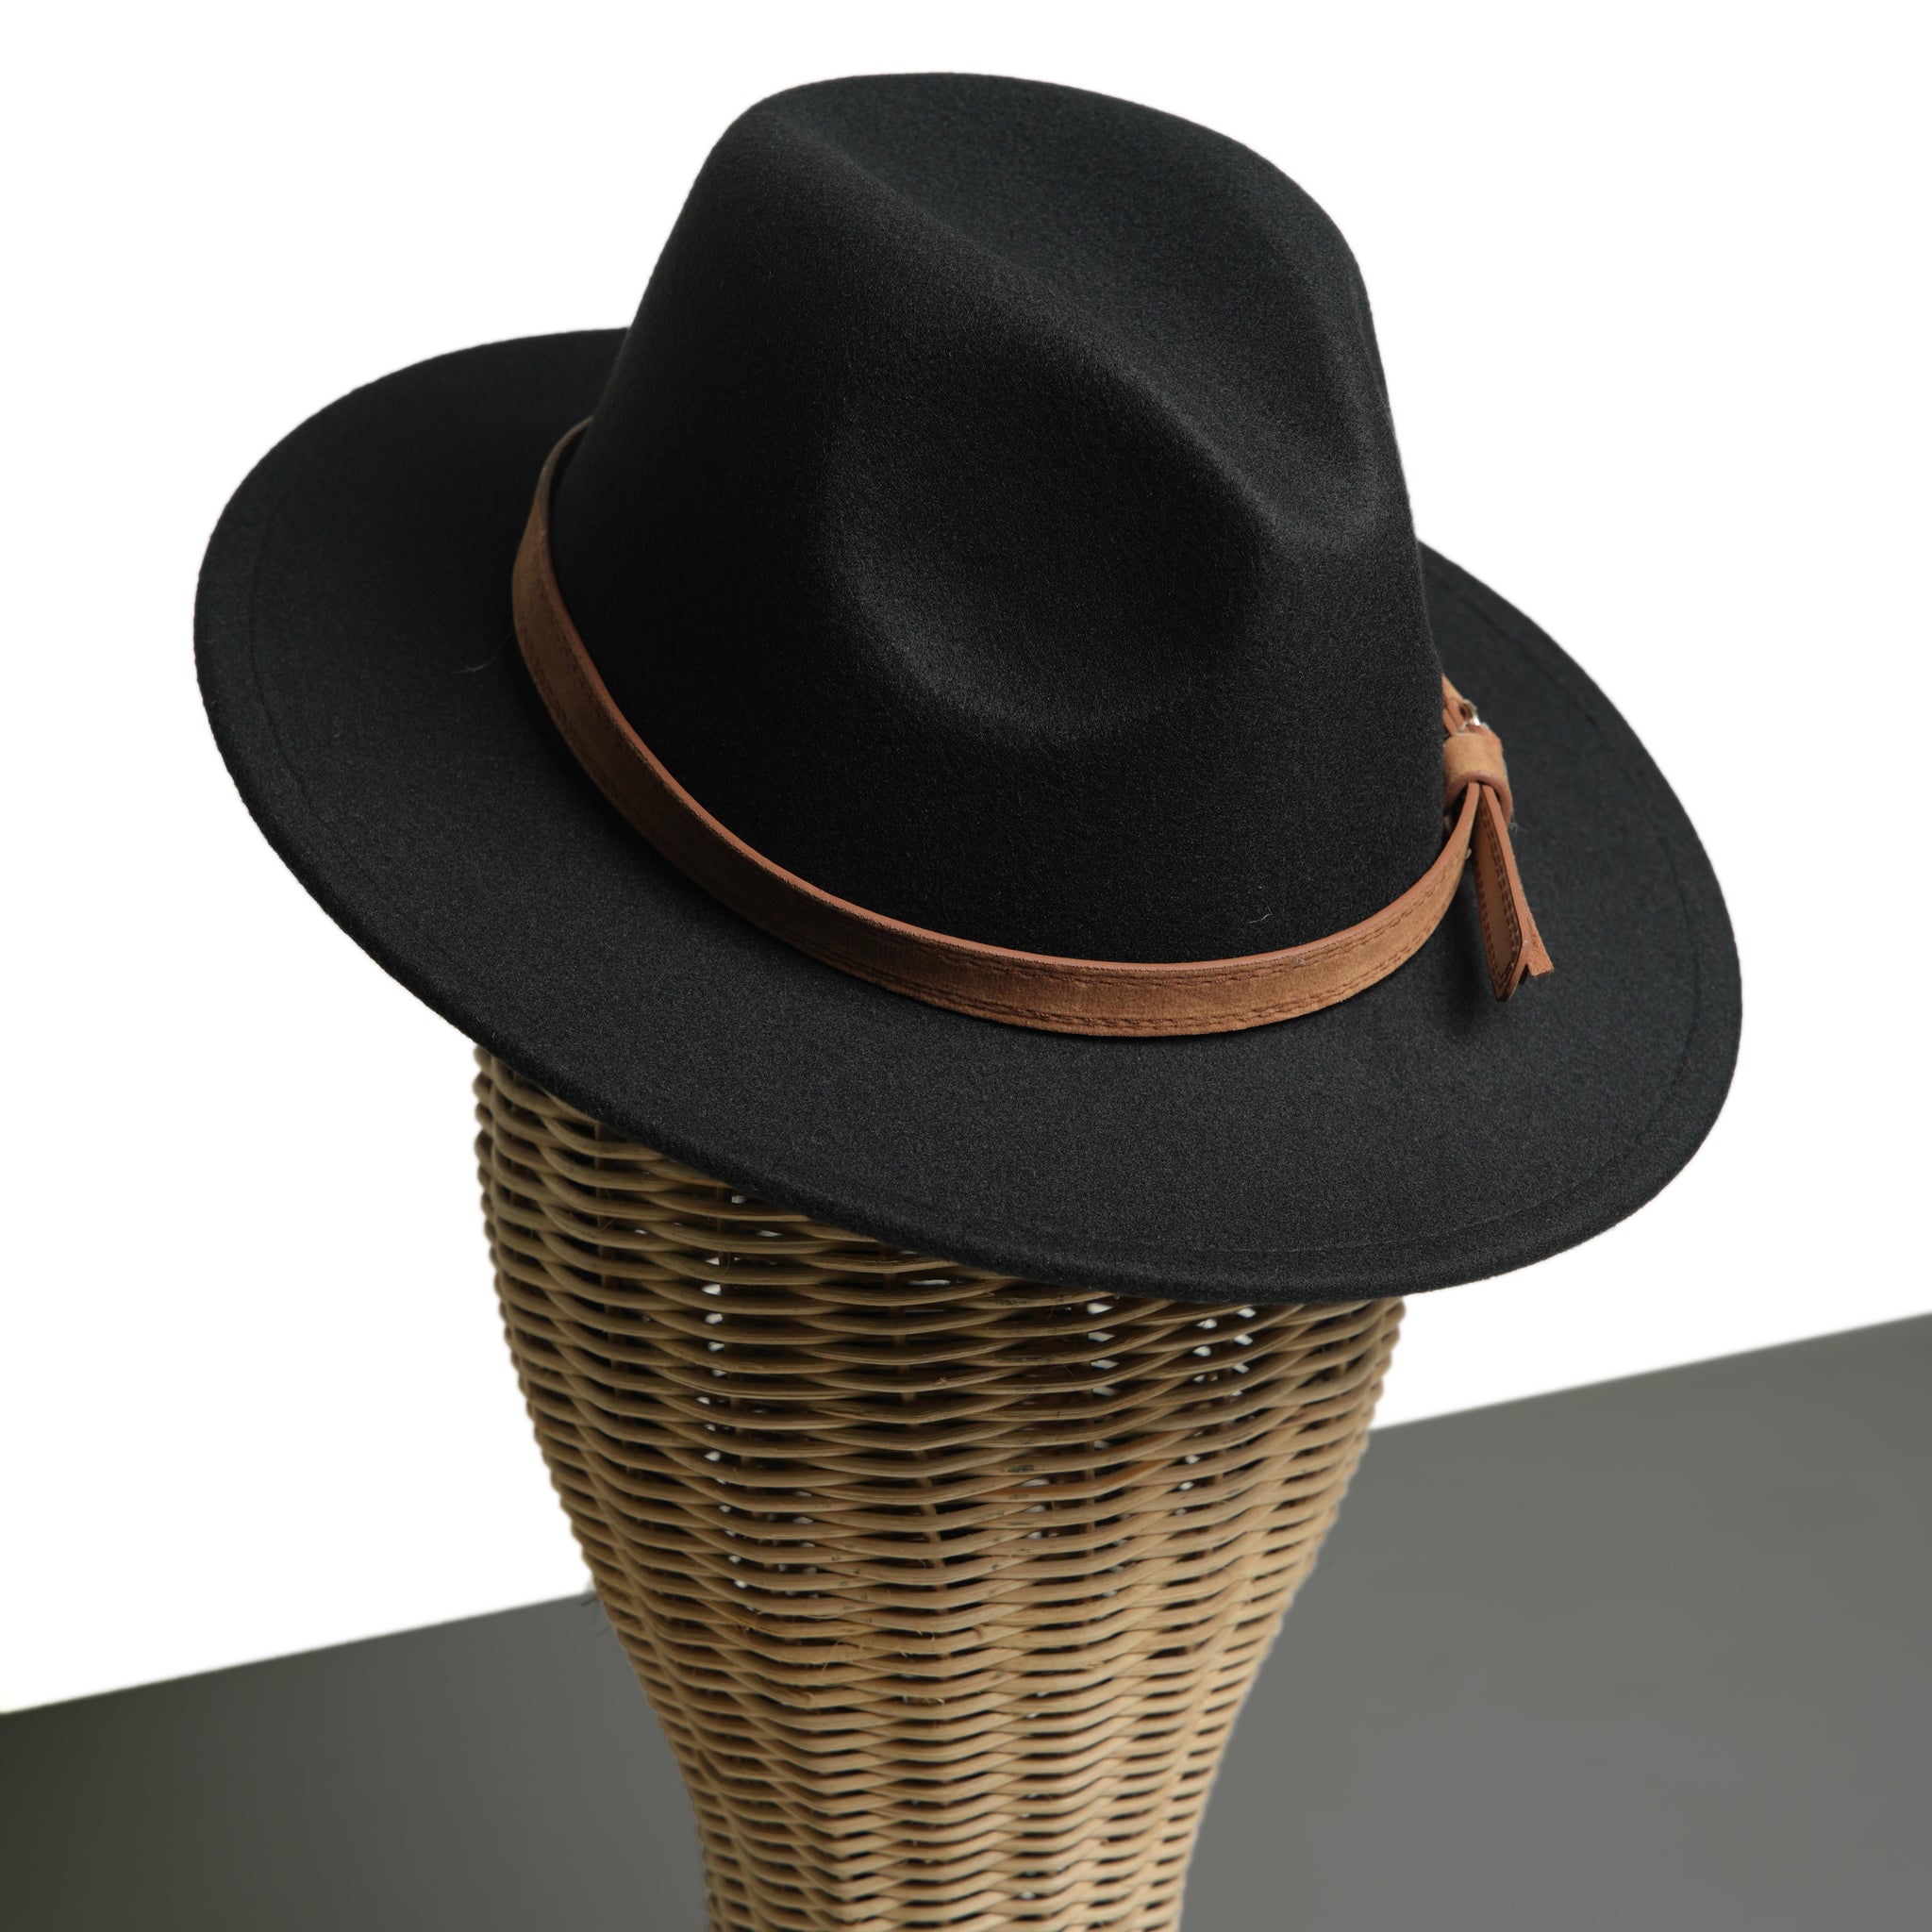 Chokore Pinched Cowboy Hat with PU Leather Belt (Black)